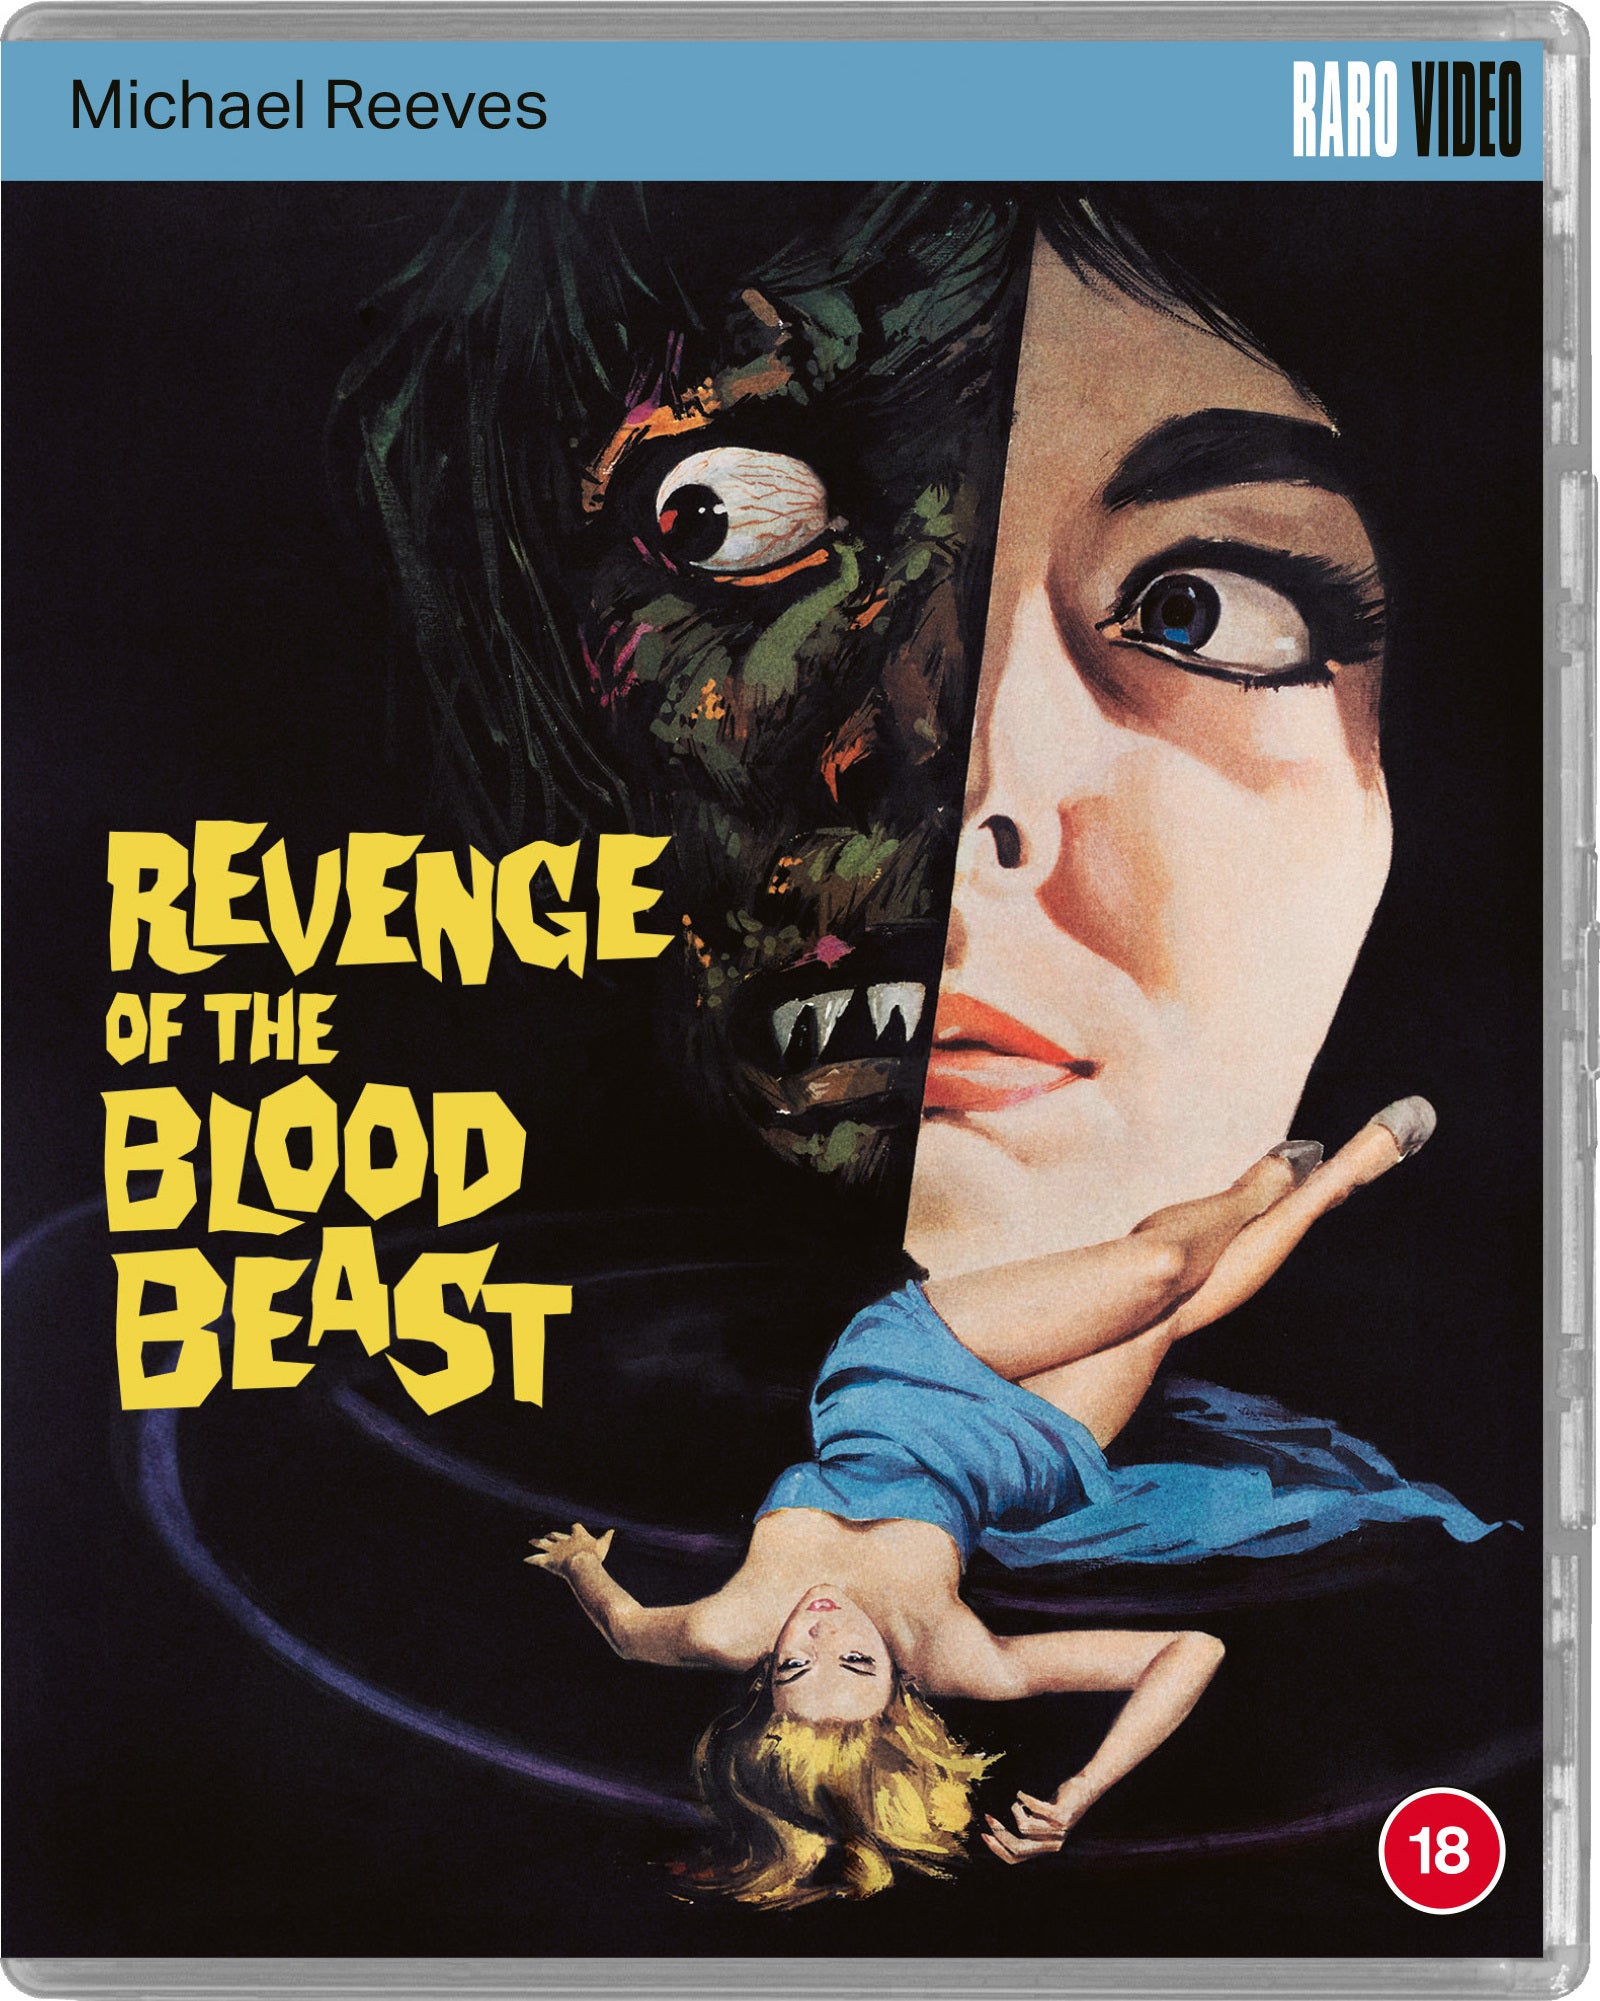 REVENGE OF THE BLOOD BEAST (REGION FREE IMPORT - LIMITED EDITION) BLU-RAY [PRE-ORDER]